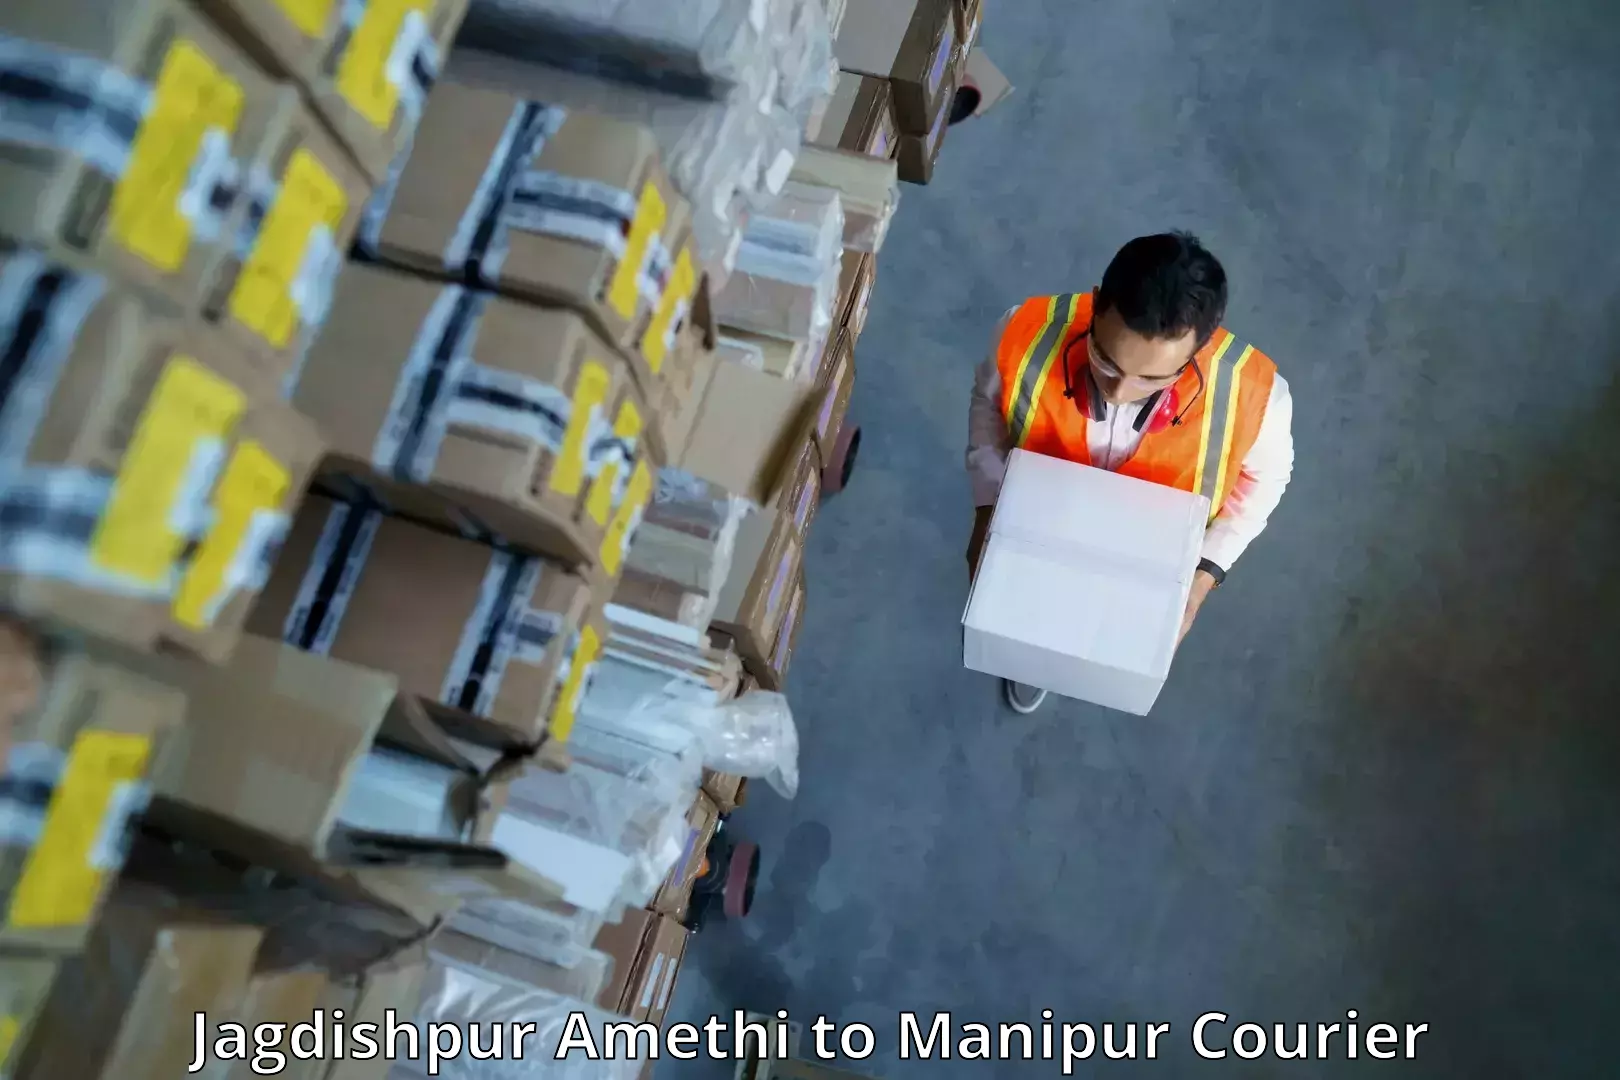 Reliable freight solutions in Jagdishpur Amethi to Senapati